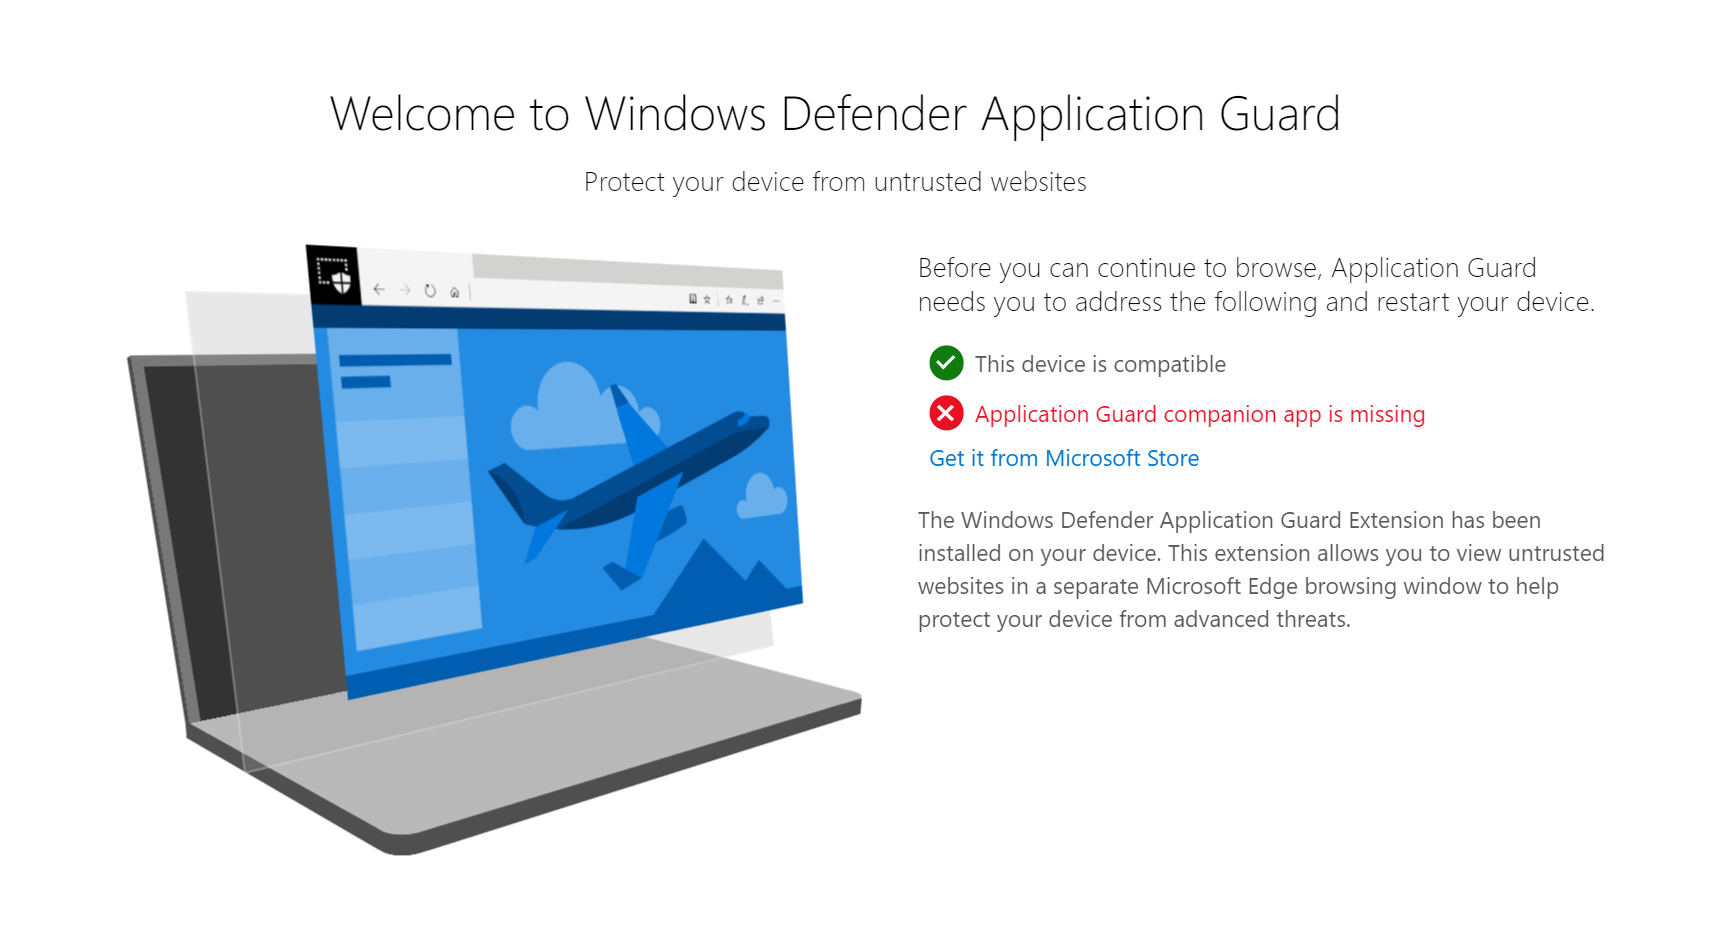 Windows Defender Device Guard: Attack Surface Reduction windows-defender-application-guard-components-not-complete.png